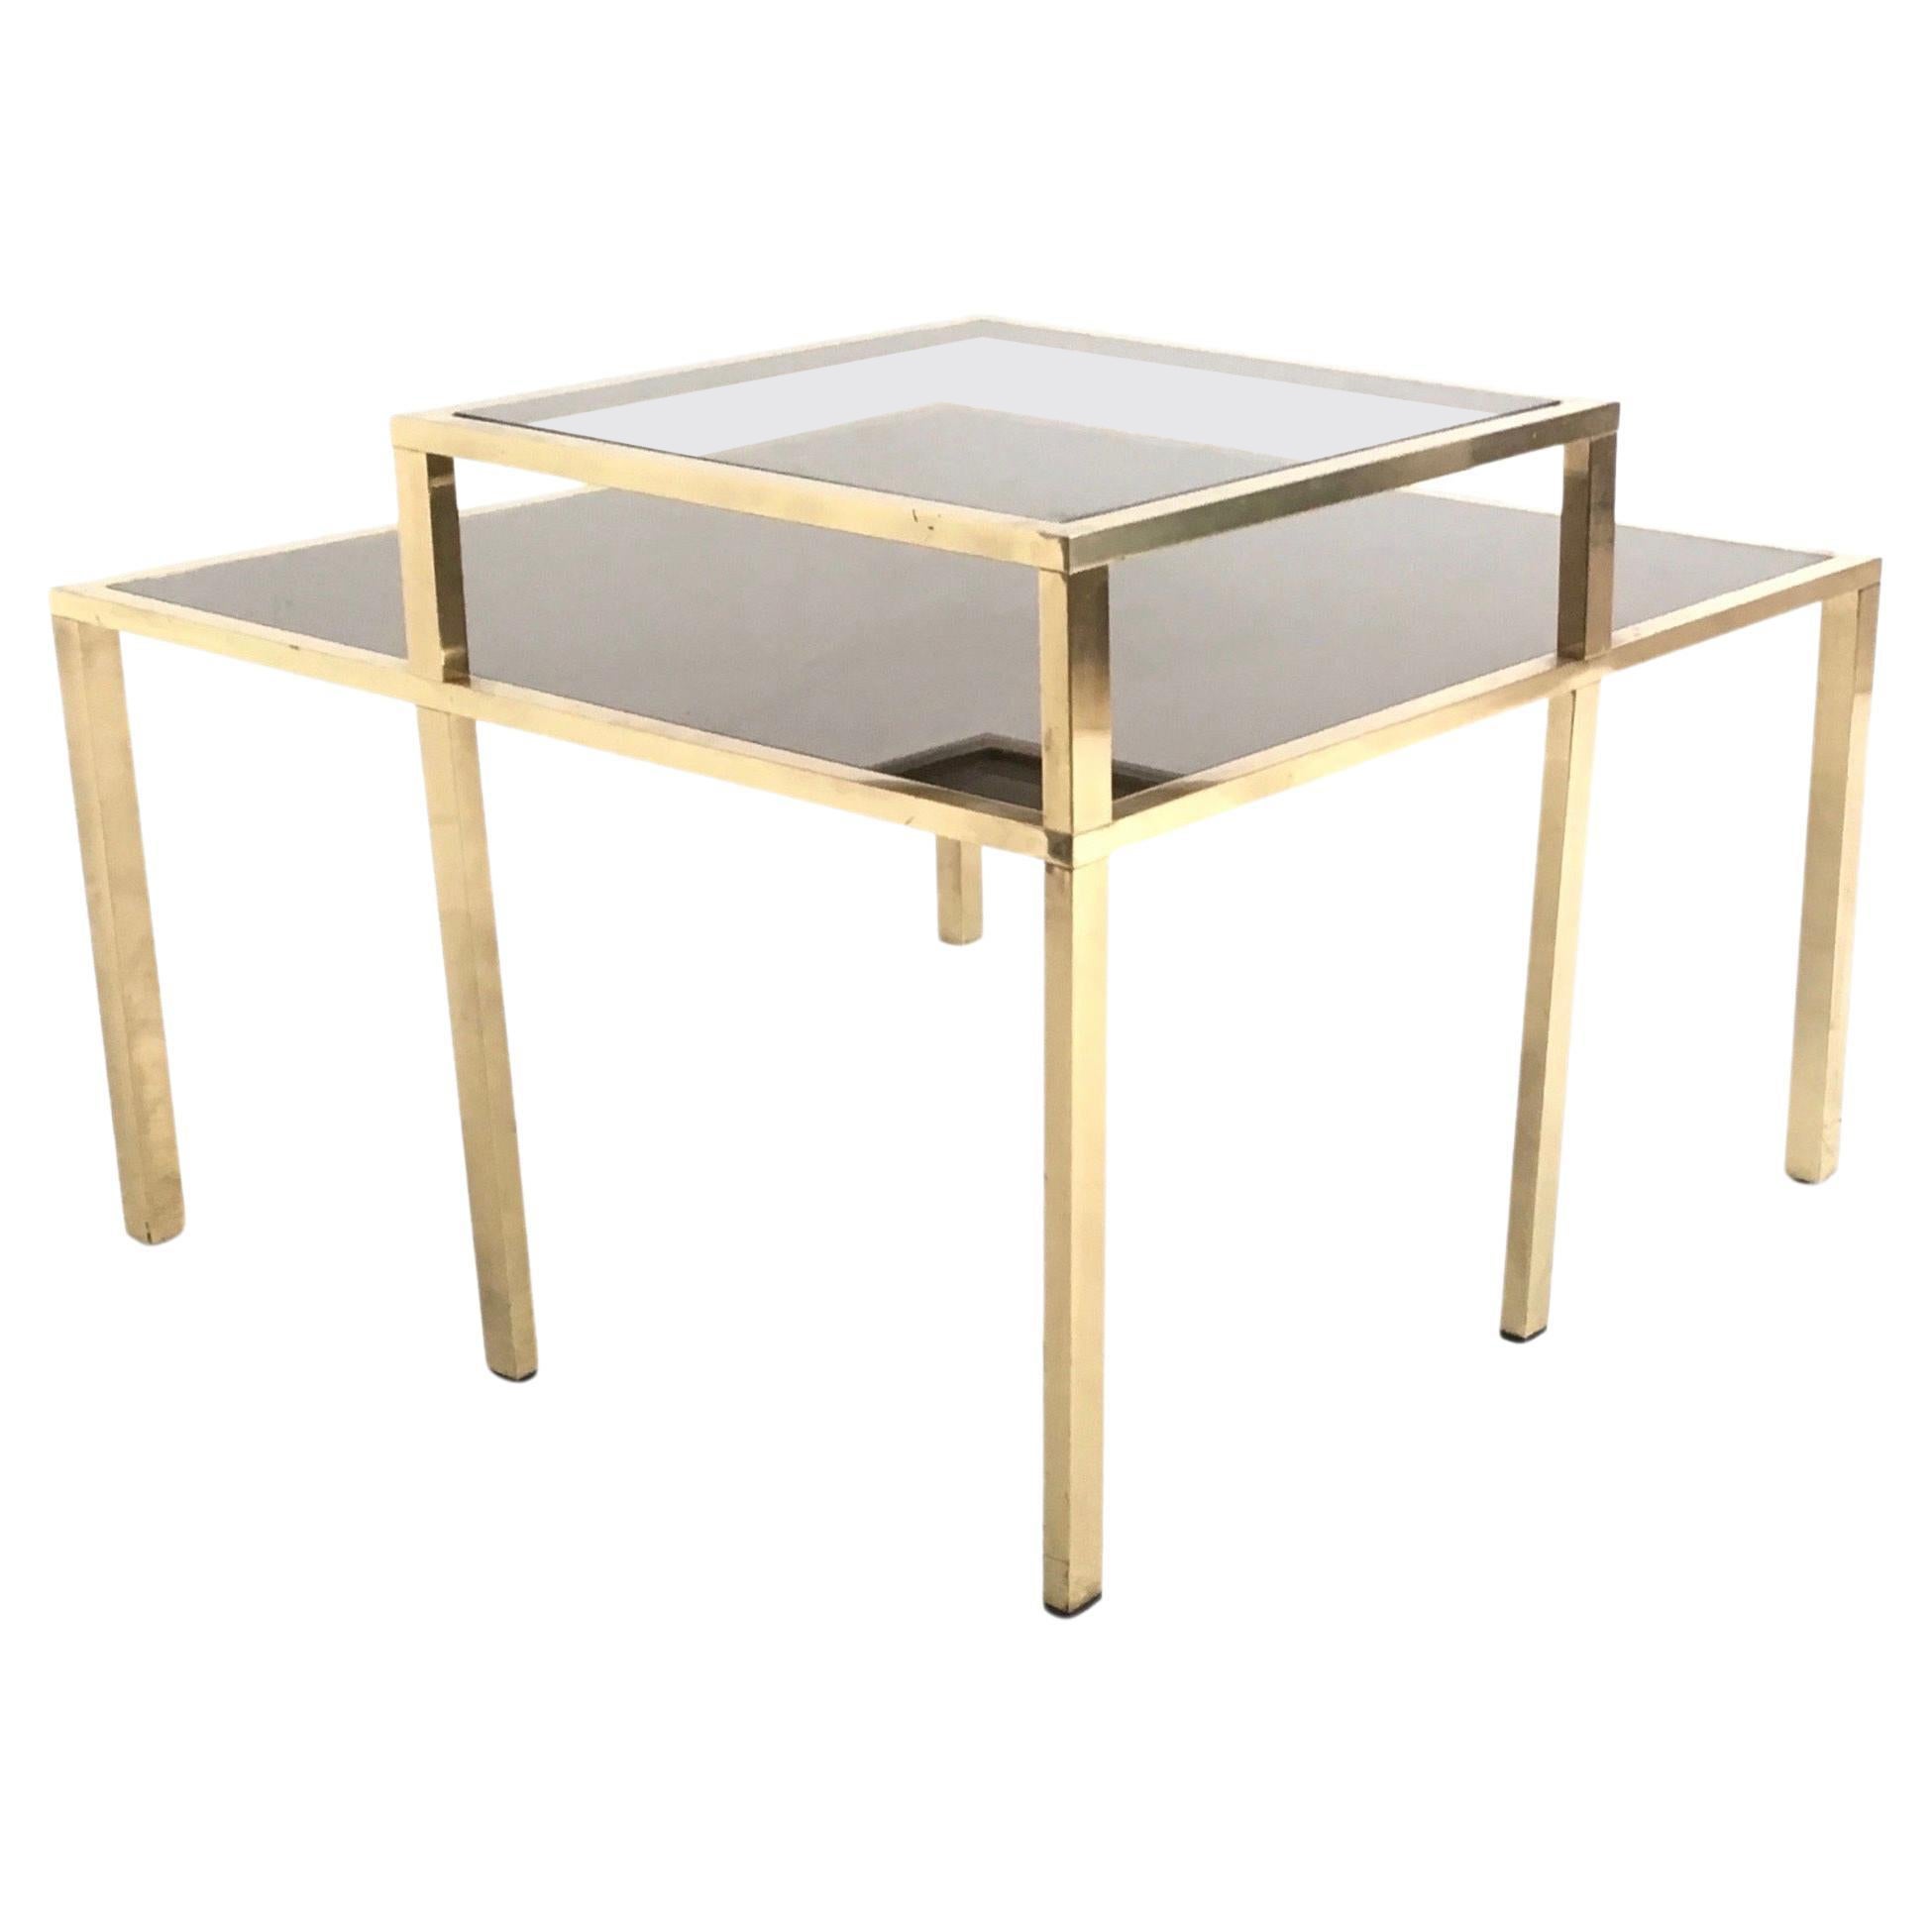 Postmodern Square Brass Coffee Table with Glass Shelf and Mirrored Top, Italy